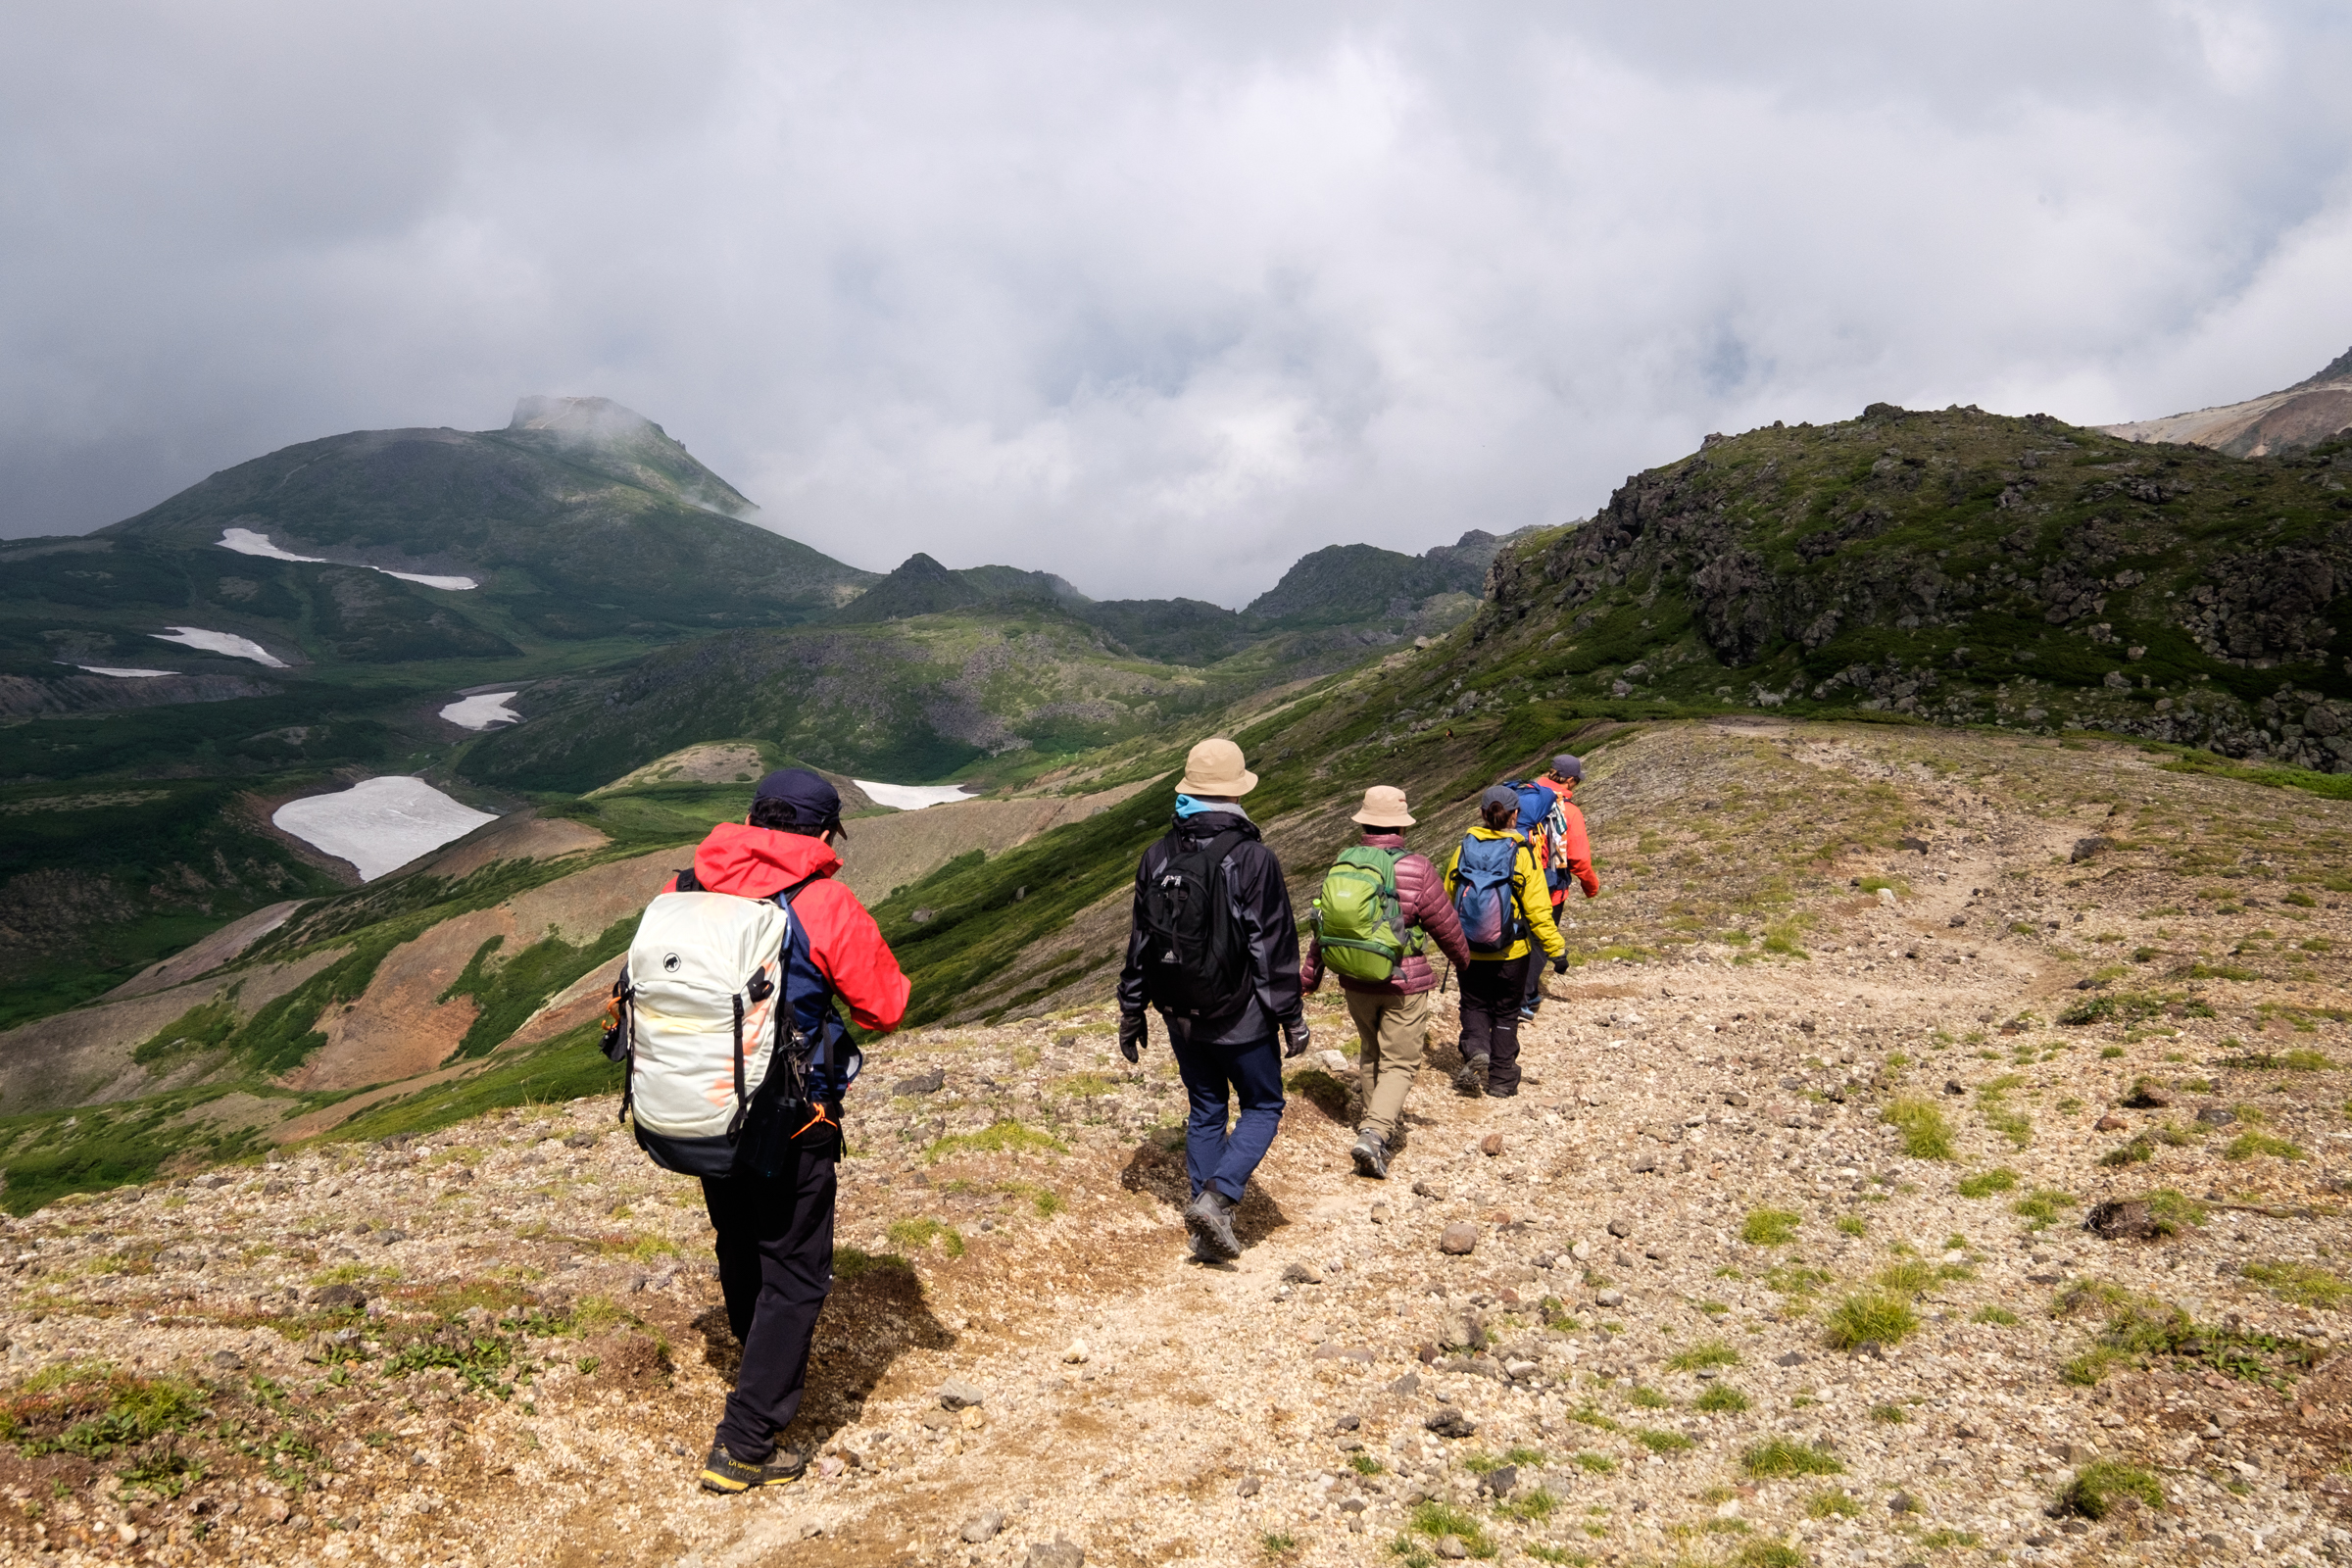 A group of hikers walk along the edge of the Ohachidaira crater in the Daisetsuzan National Park. They are illuminated by afternoon sun while Mt. Kurodake has clouds swirling around it in the background.